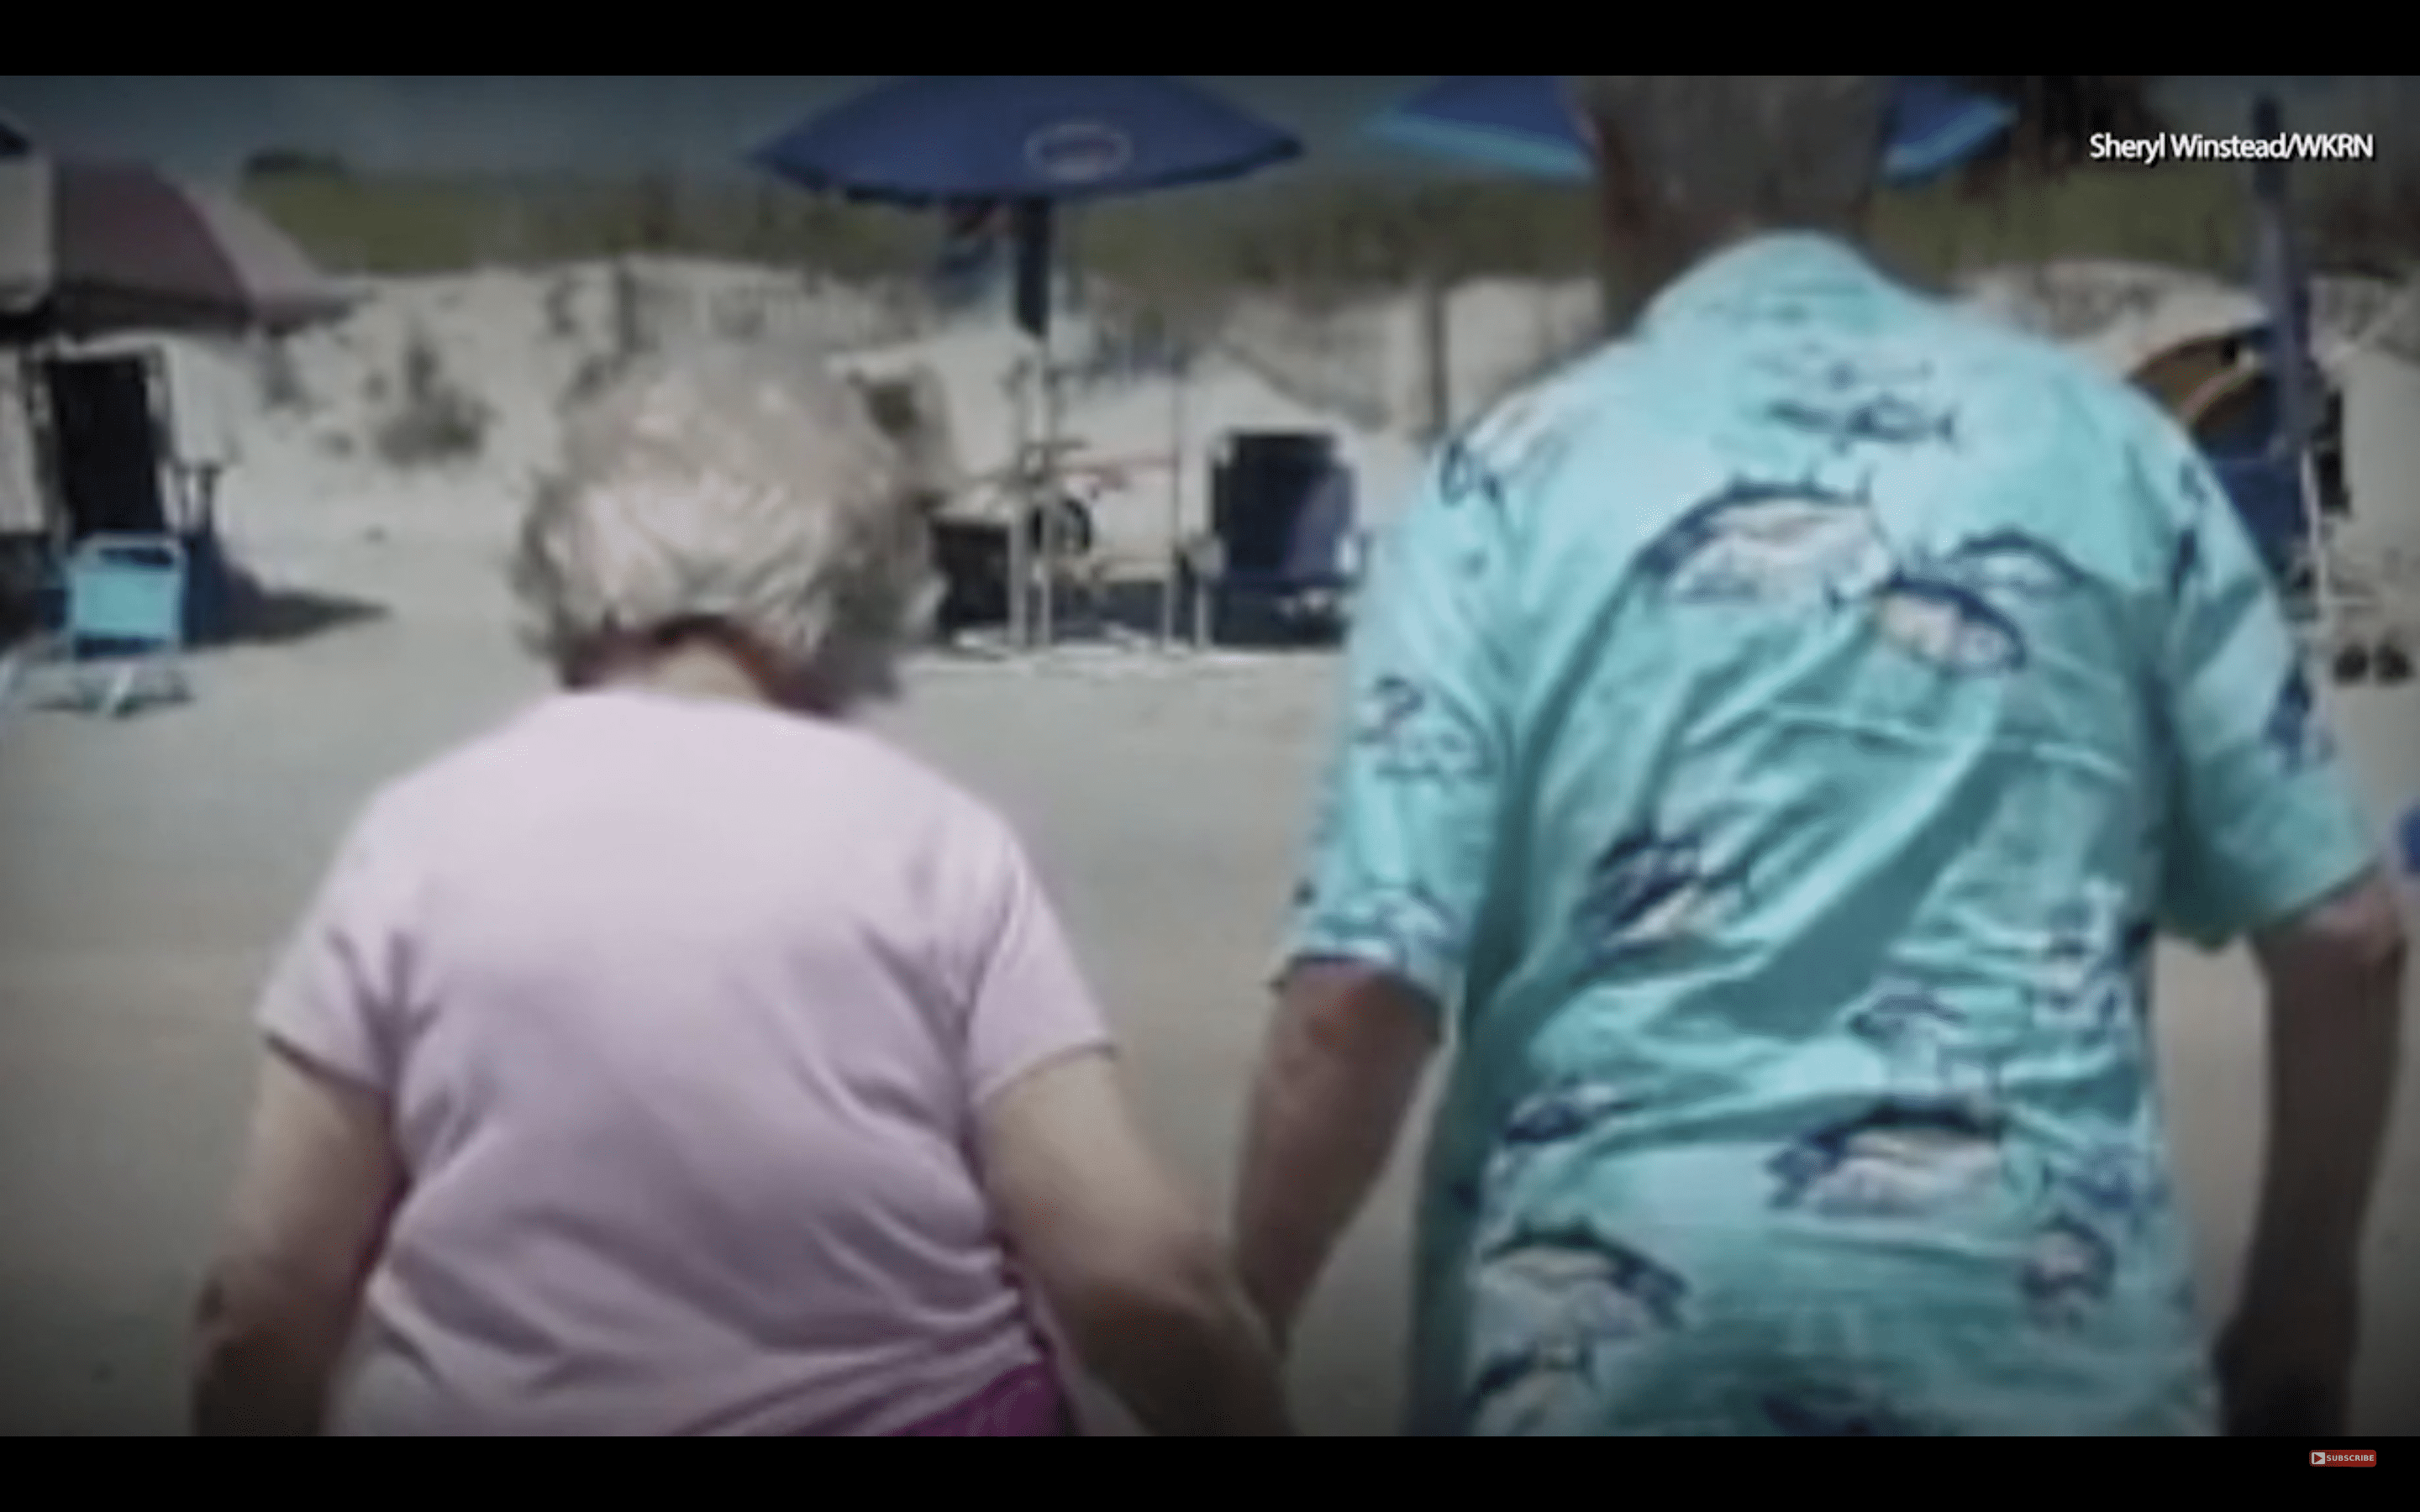 Dolores and Trent Winstead walking while holding hands. | Photo: YouTube.com/WSB-TV